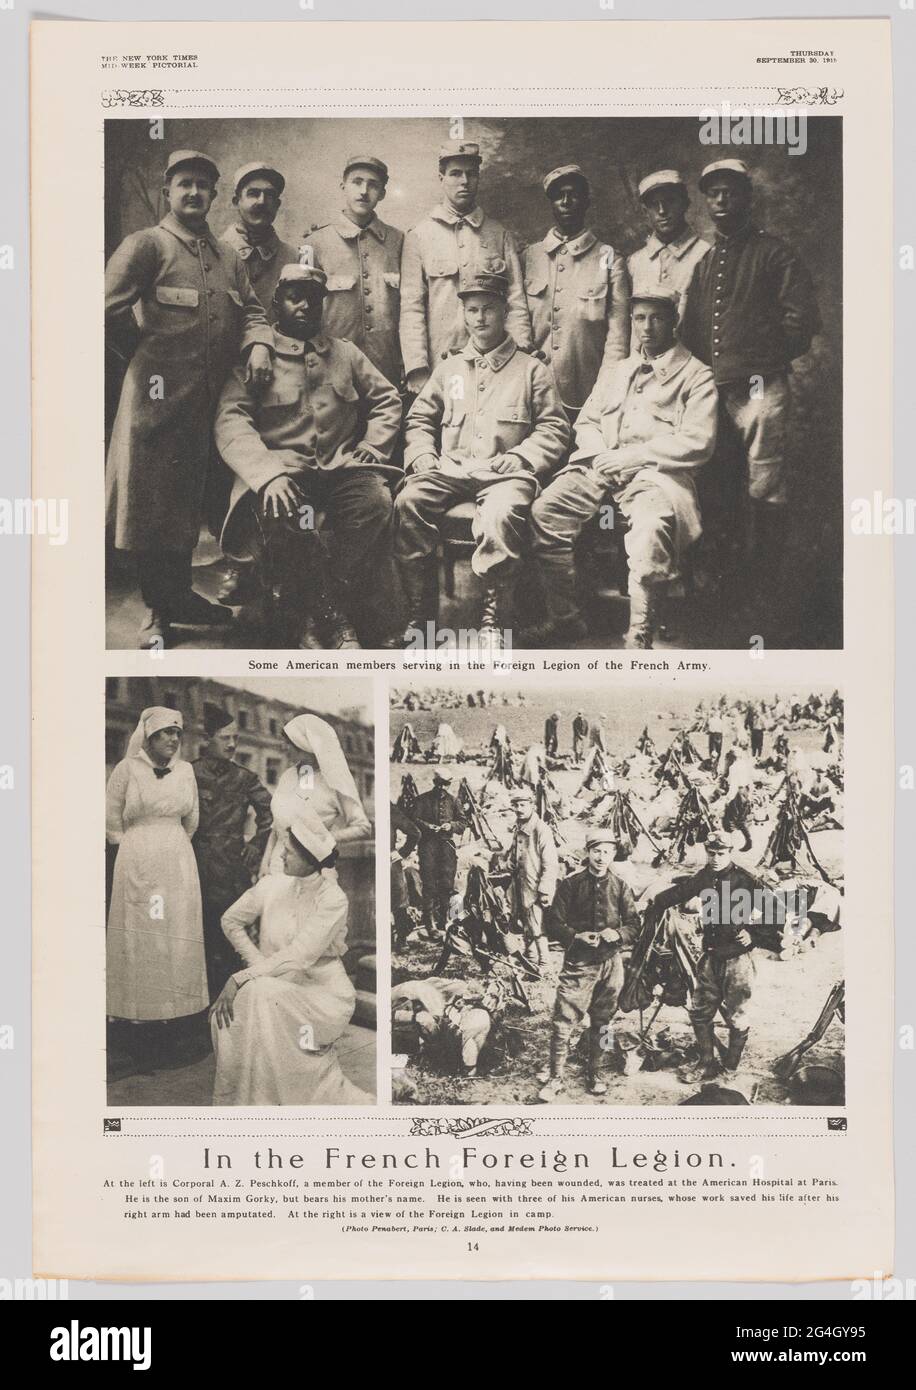 The New York Times Mid-Week Pictorial from Thursday, September 30, 1915 is a torn out page from the magazine. The page features three photographs. Top: [Some American members serving in the Foreign Legion of the French Army], a group of both black and white military men, seven standing and three seated, in their Legion uniforms. The image on the bottom left is of a soldier, Corporal A.Z. Peschkoff, and three American women nurses. The third image, on the bottom right, is of men in the Foreign Legion standing by their tents and fire pits in camp. The bottom of the page has the name of the artic Stock Photo